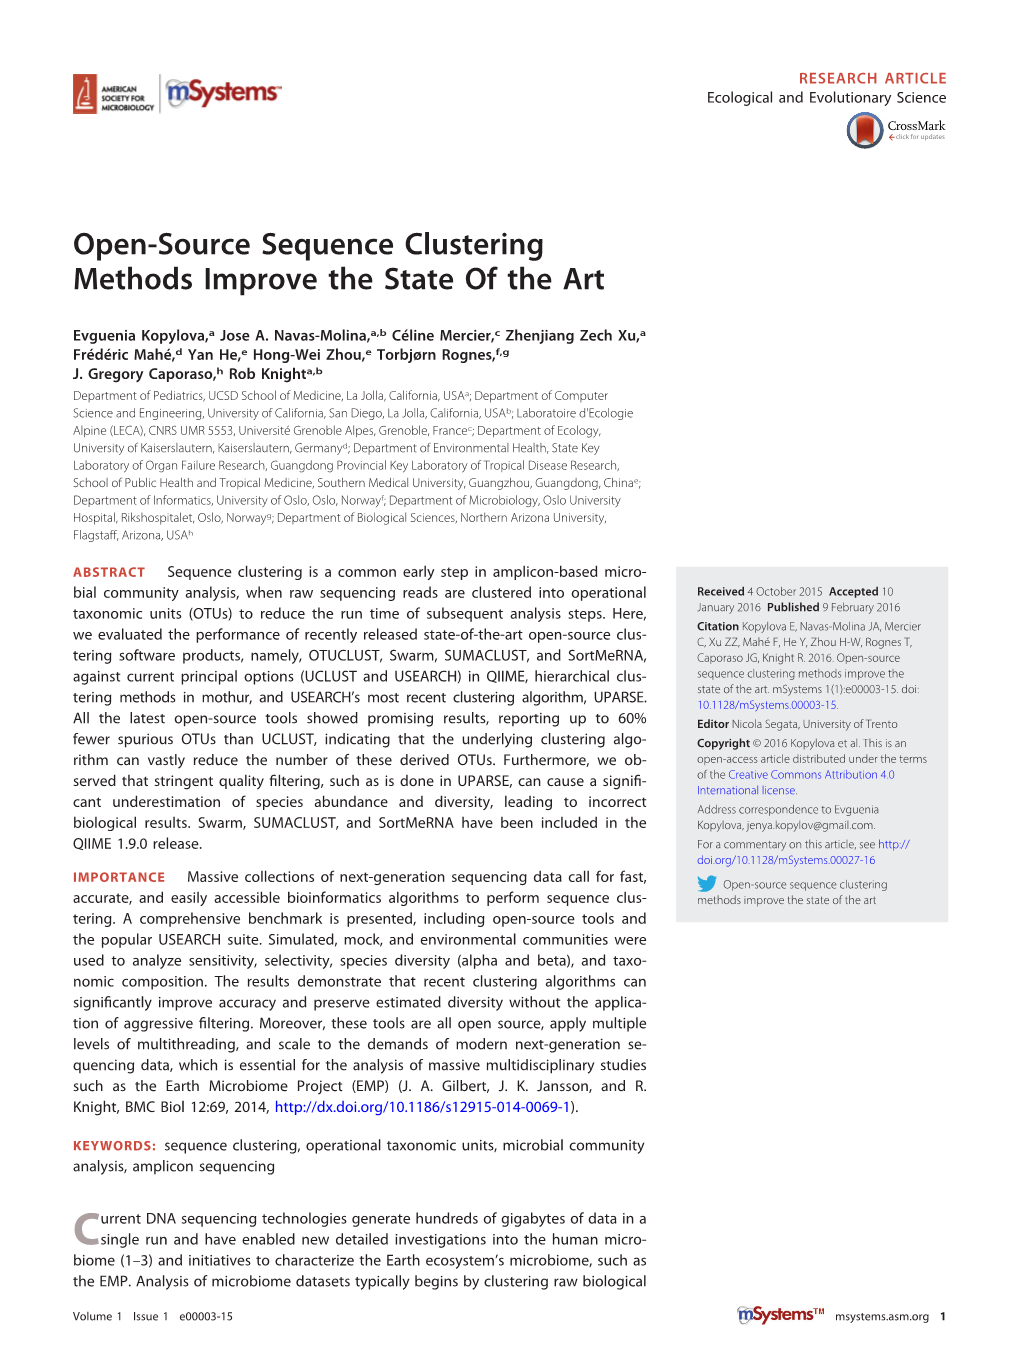 Open-Source Sequence Clustering Methods Improve the State of the Art